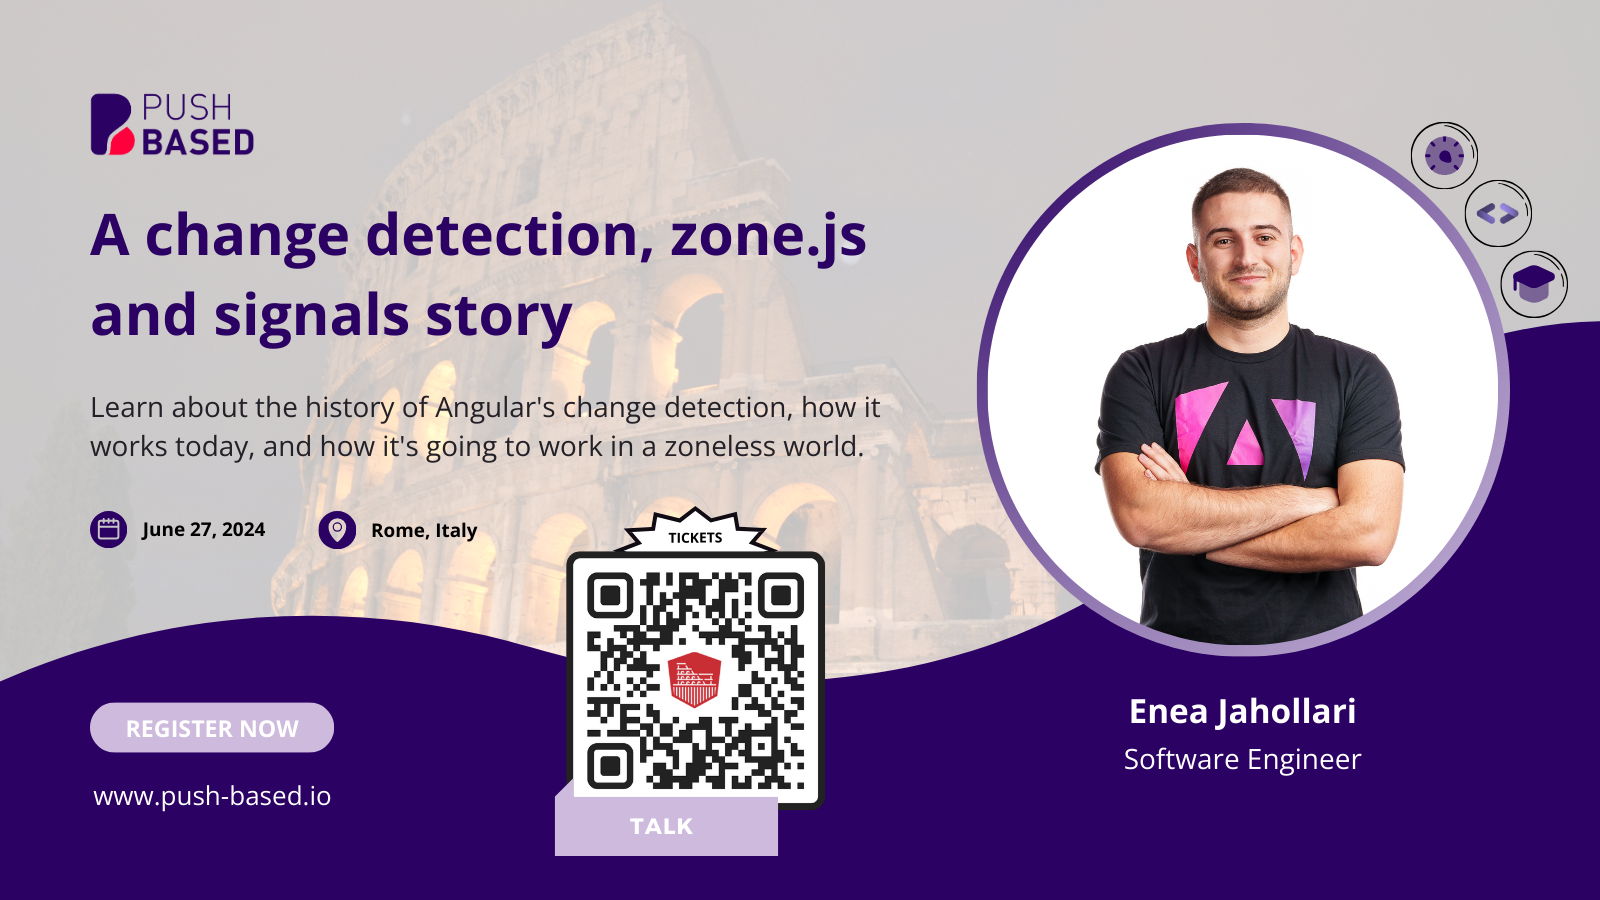 A change detection, zone.js and signals story. Poster.